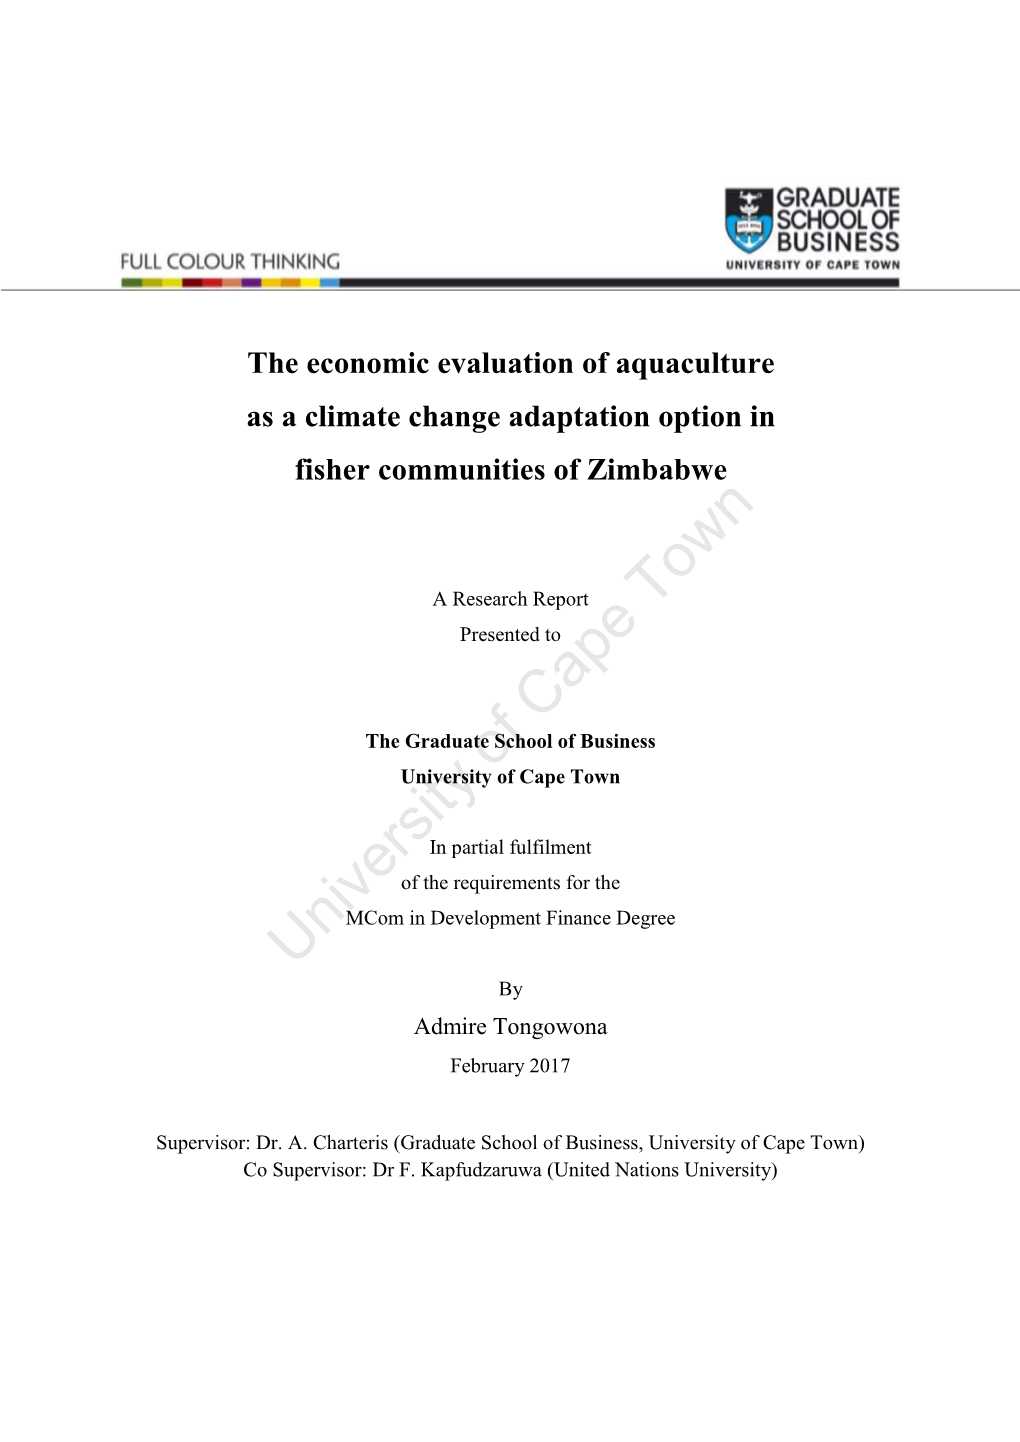 The Economic Evaluation of Aquaculture As a Climate Change Adaptation Option in Fisher Communities of Zimbabwe